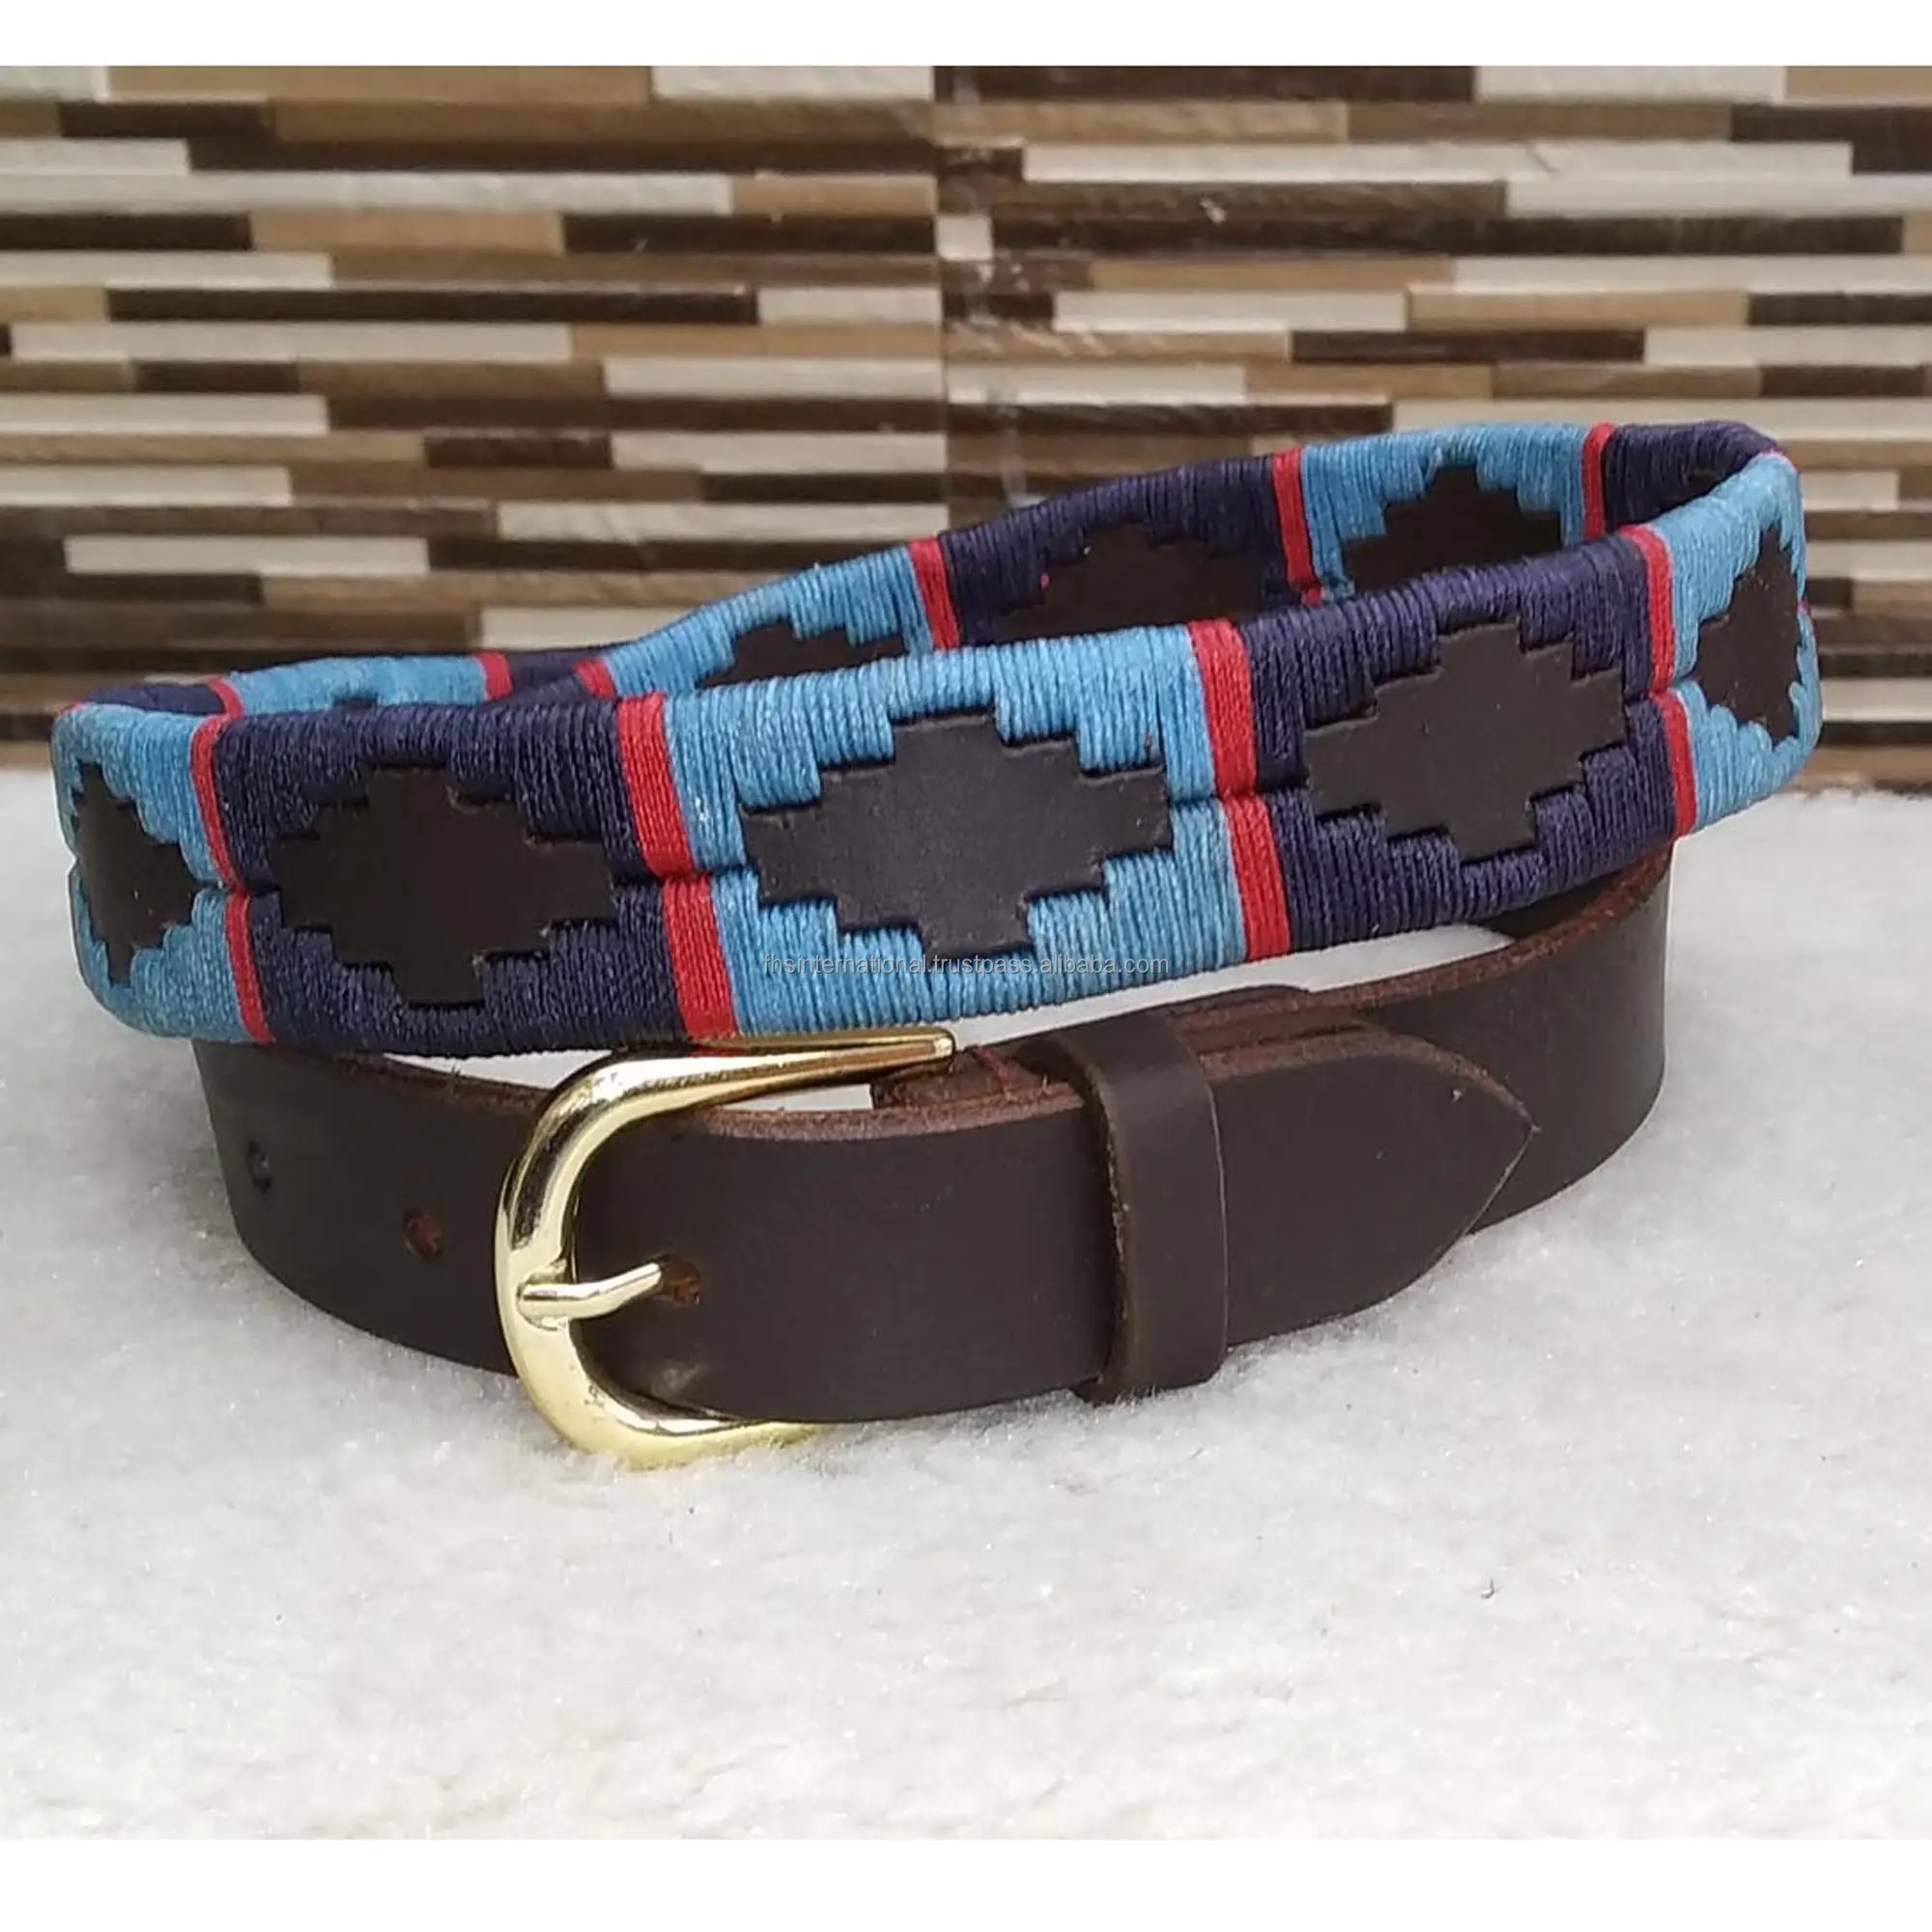 Top Quality -Polo Belt made of best quality Indian Leather - Navy Blue and Ice Blue with Red Strip